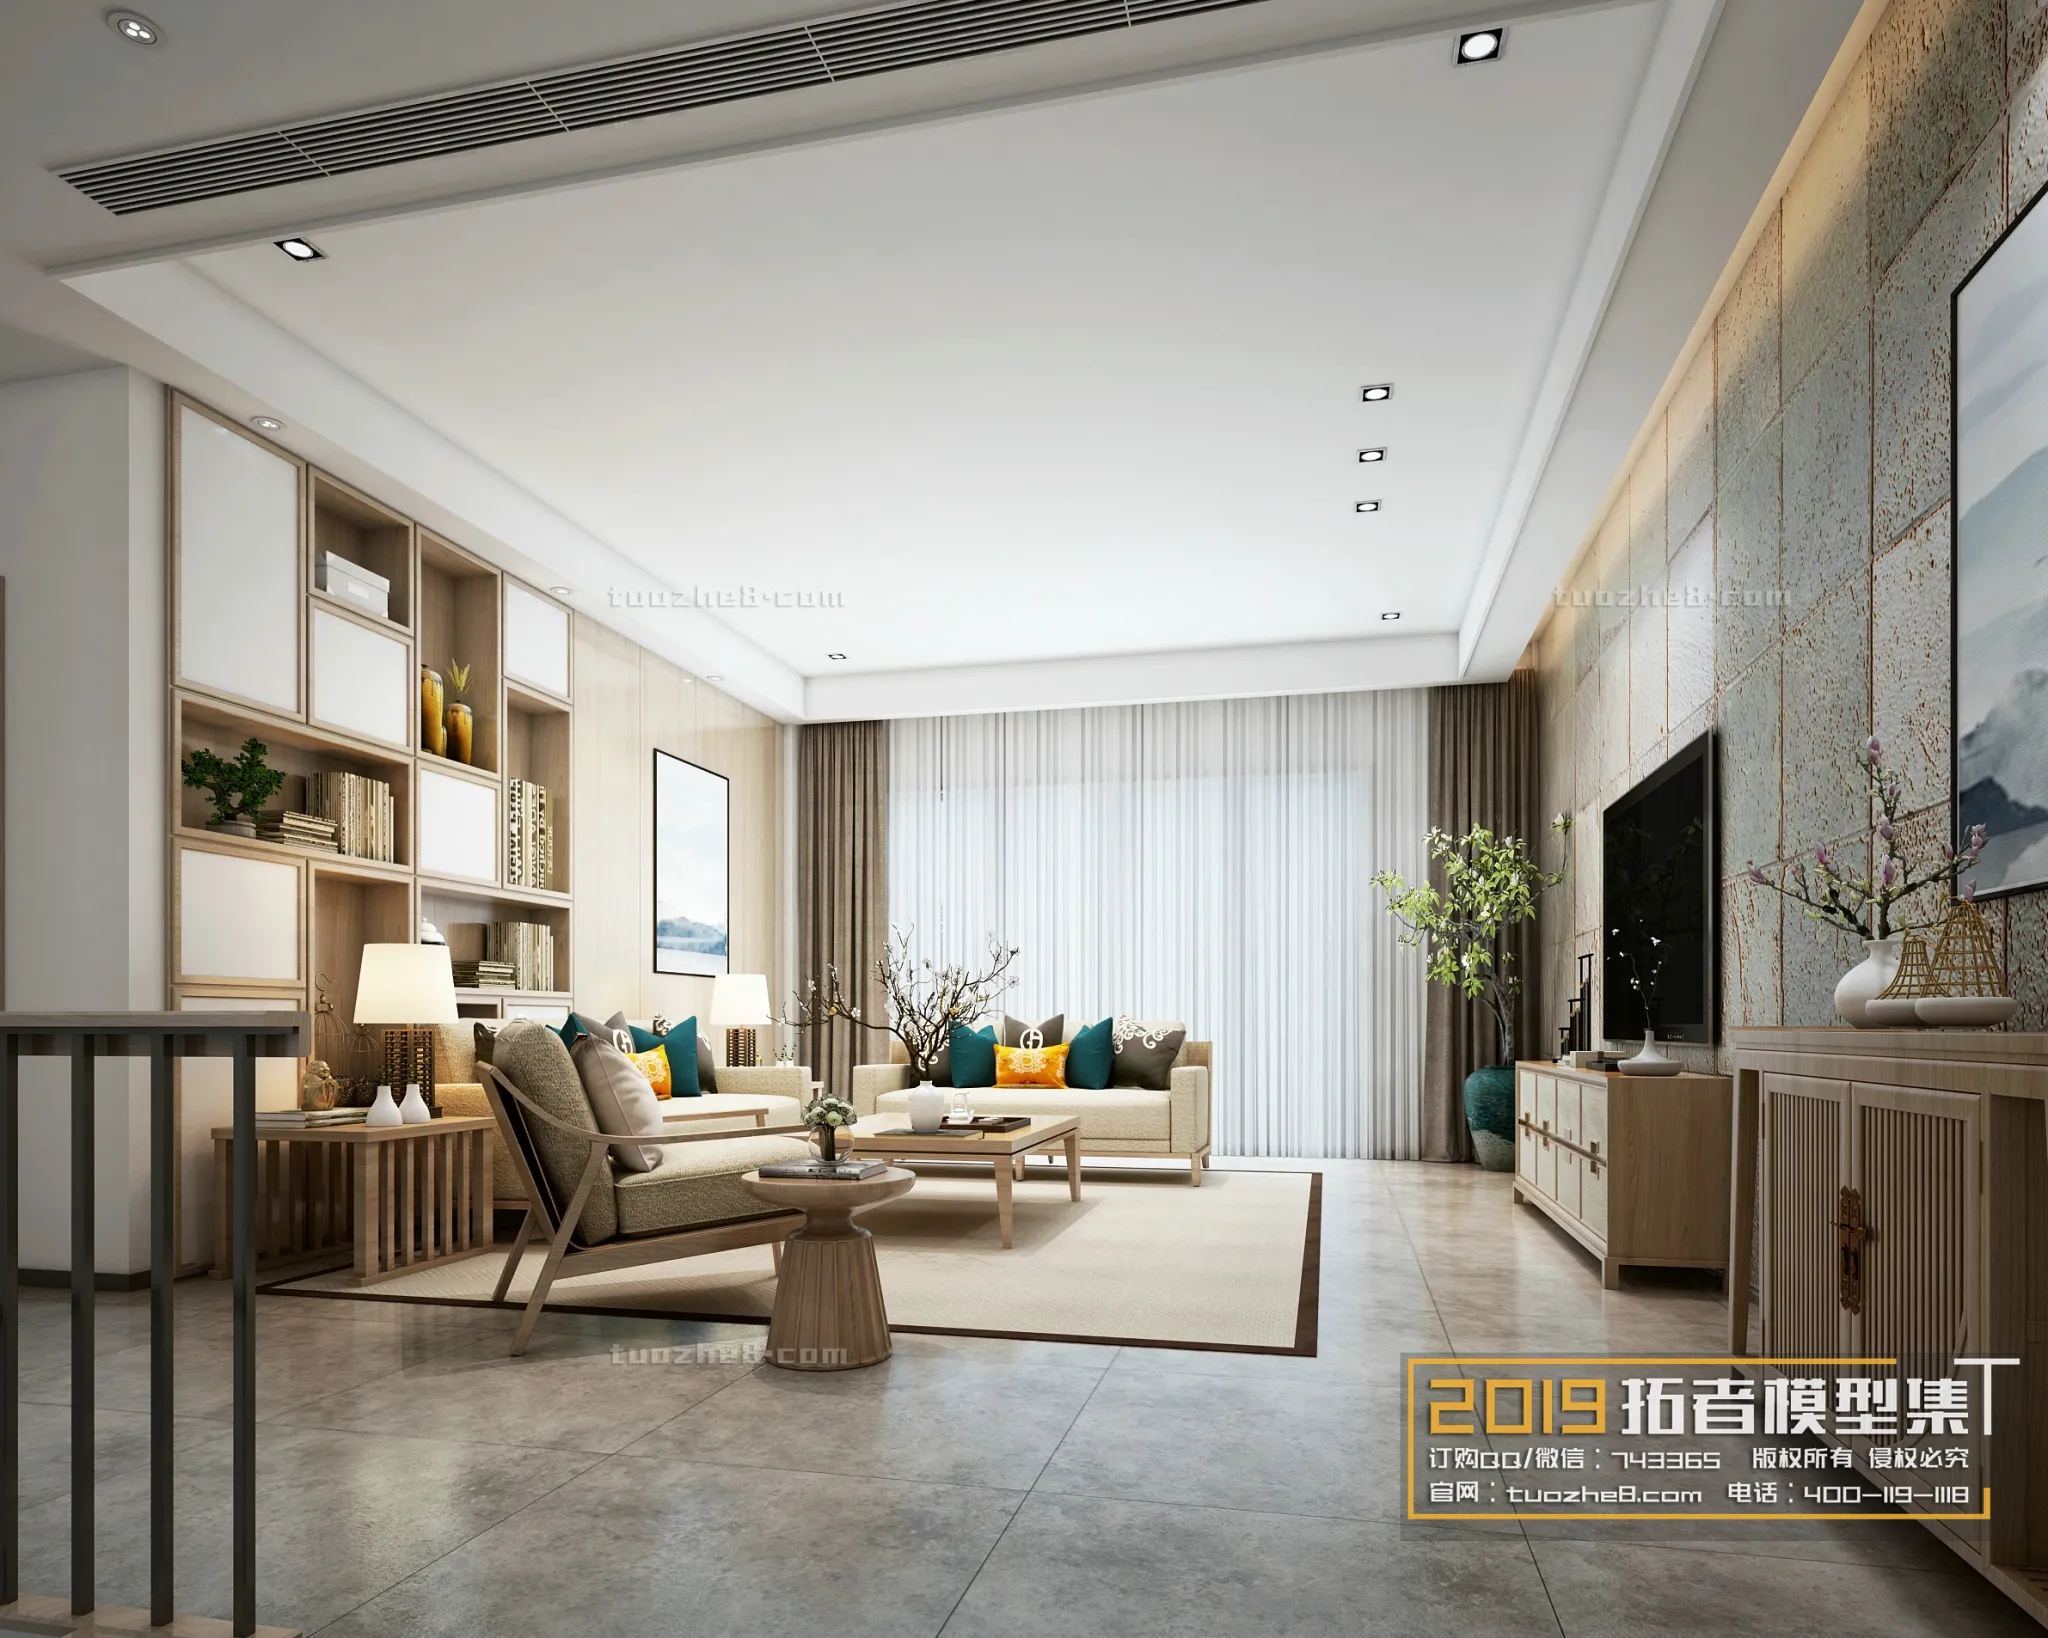 Extension Interior – LINGVING ROOM – CHINESE STYLES – 026